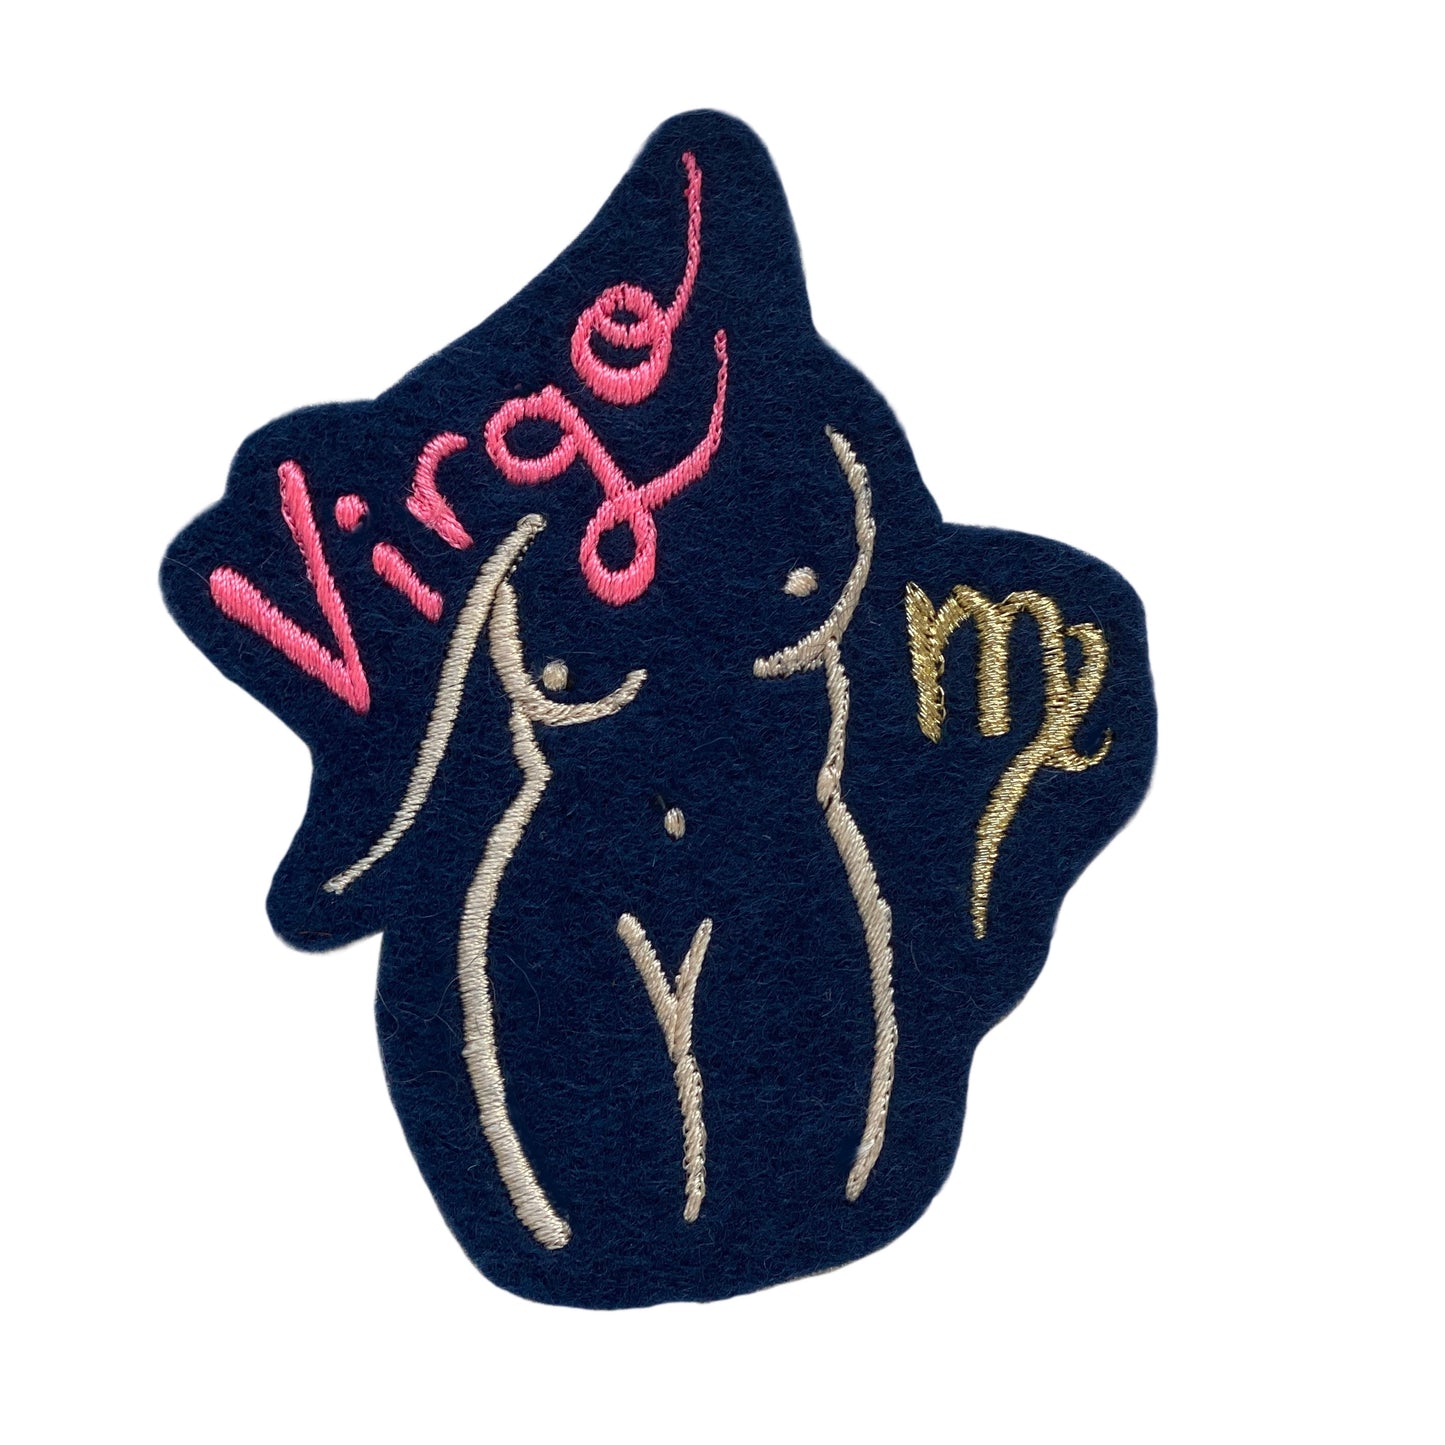 Virgo embroidered patch on white background